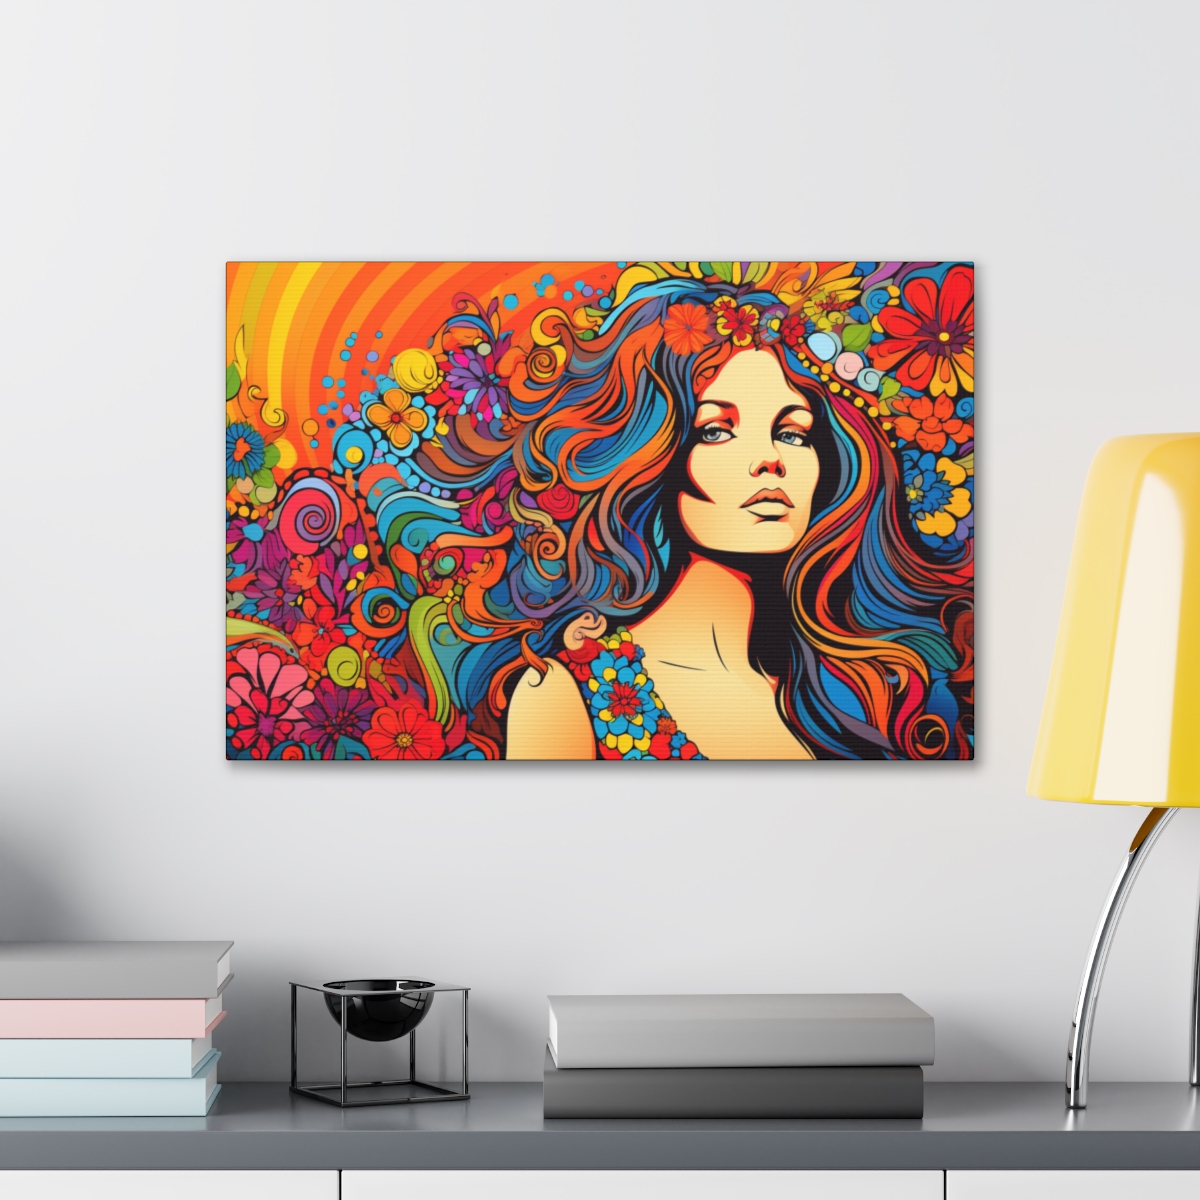 Hippie Psychedelic Art Canvas Print: Love And Light